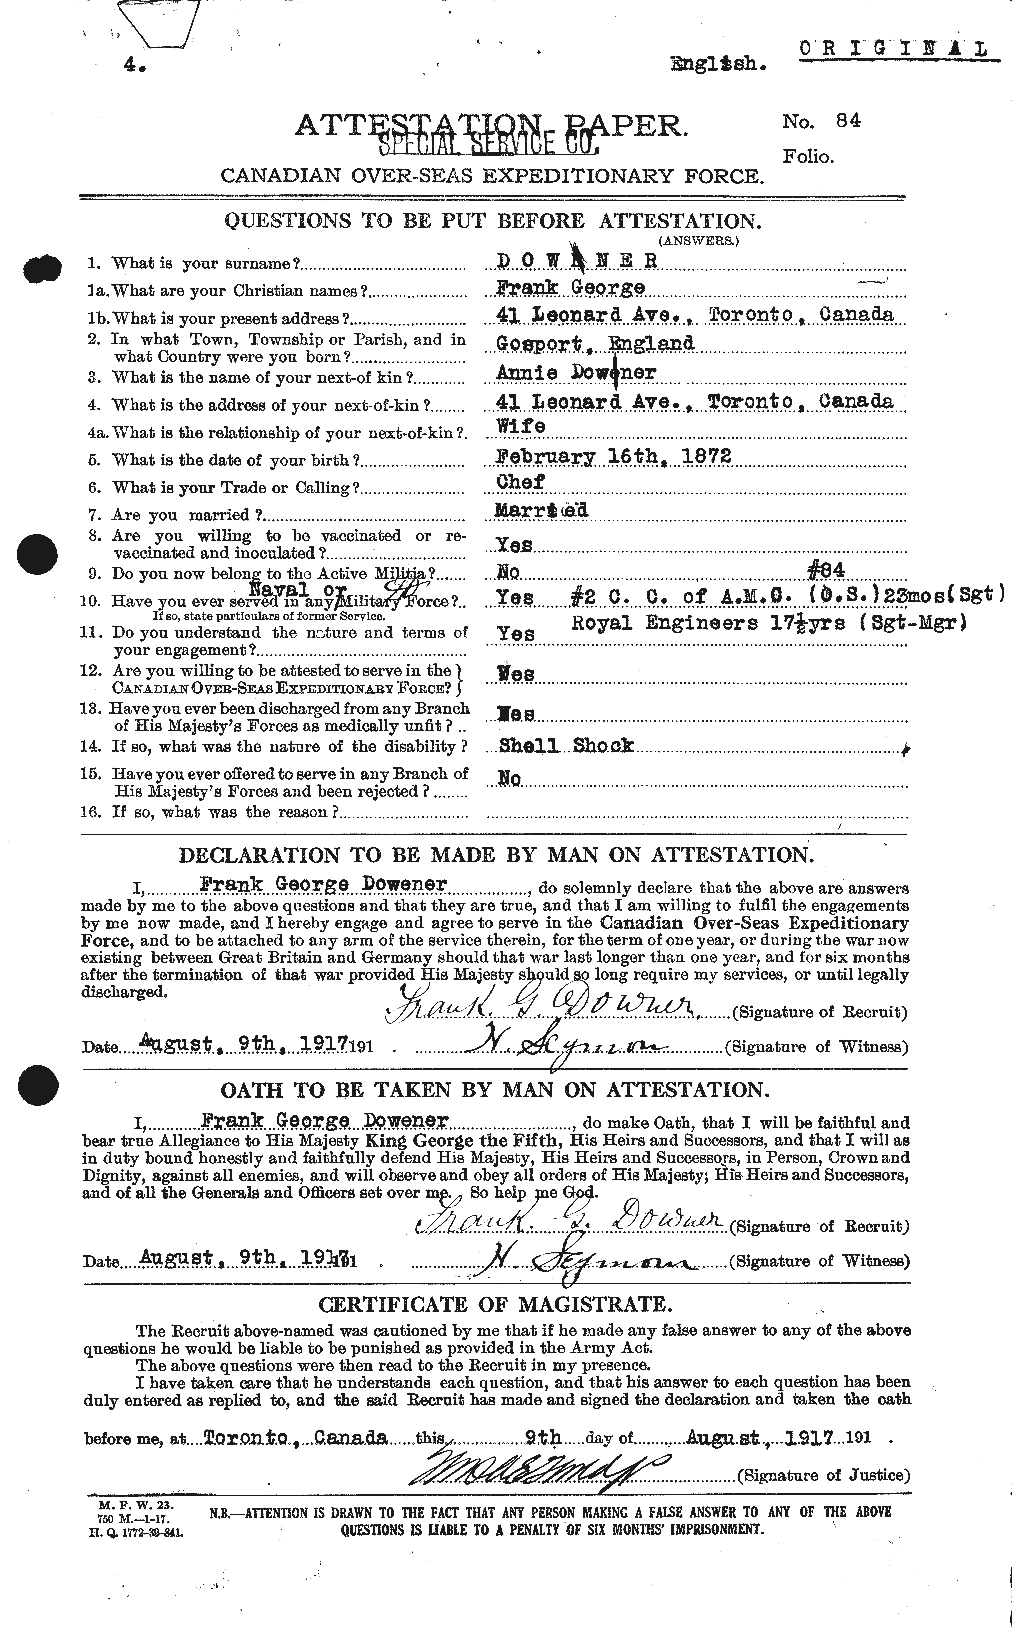 Personnel Records of the First World War - CEF 301095a